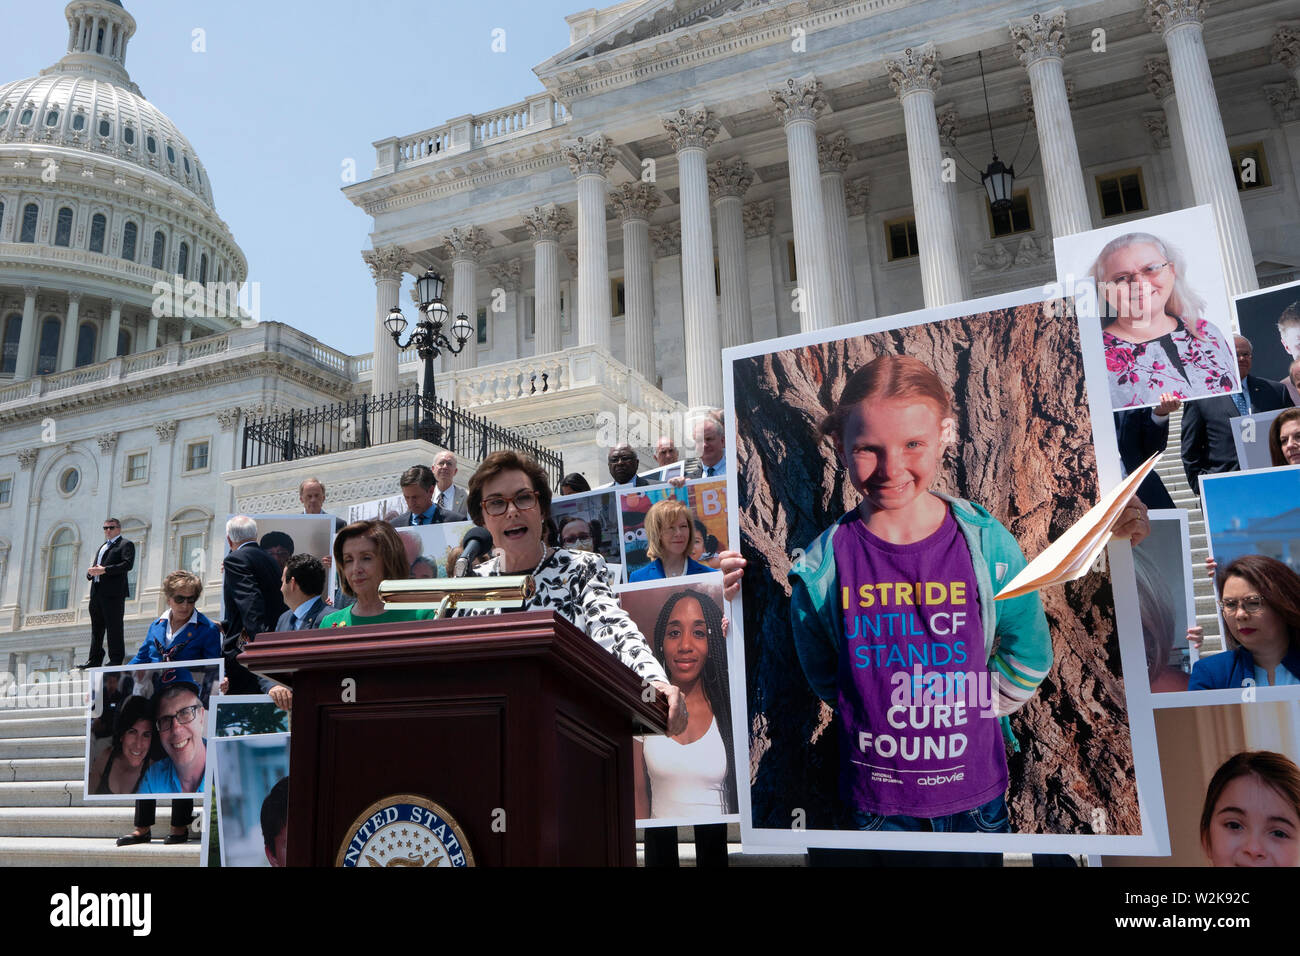 United States Senator Jacky Rosen (Democrat of Nevada) speaks during a press conference on Capitol Hill in Washington D.C., U.S. to discuss health care coverage for those with pre-existing conditions on July 9, 2019.  Credit: Stefani Reynolds / CNP /MediaPunch Stock Photo